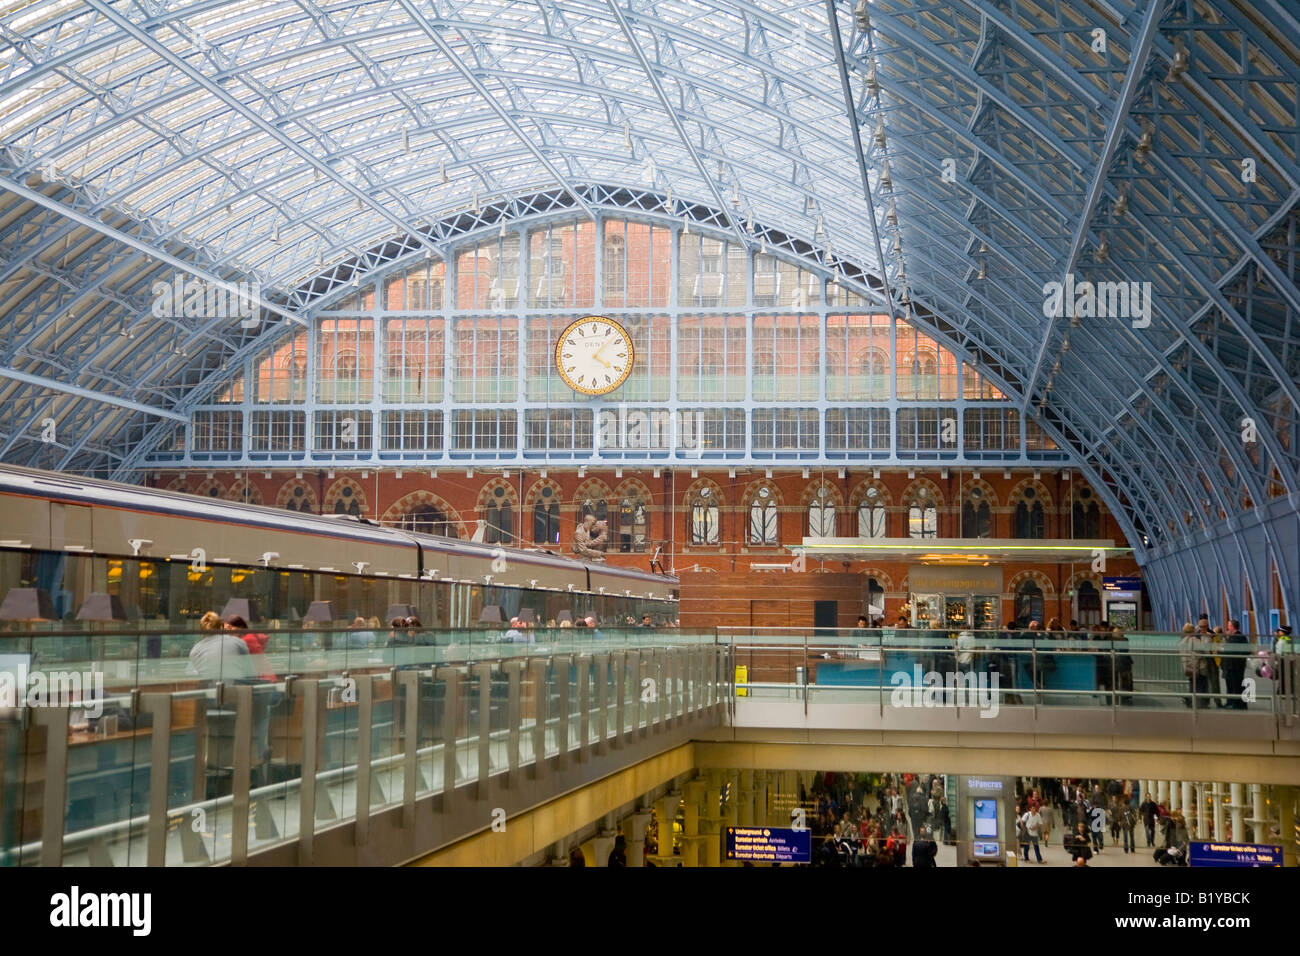 Interior showing the roof and clock in the rebuilt St Pancras Railway Station London England Stock Photo